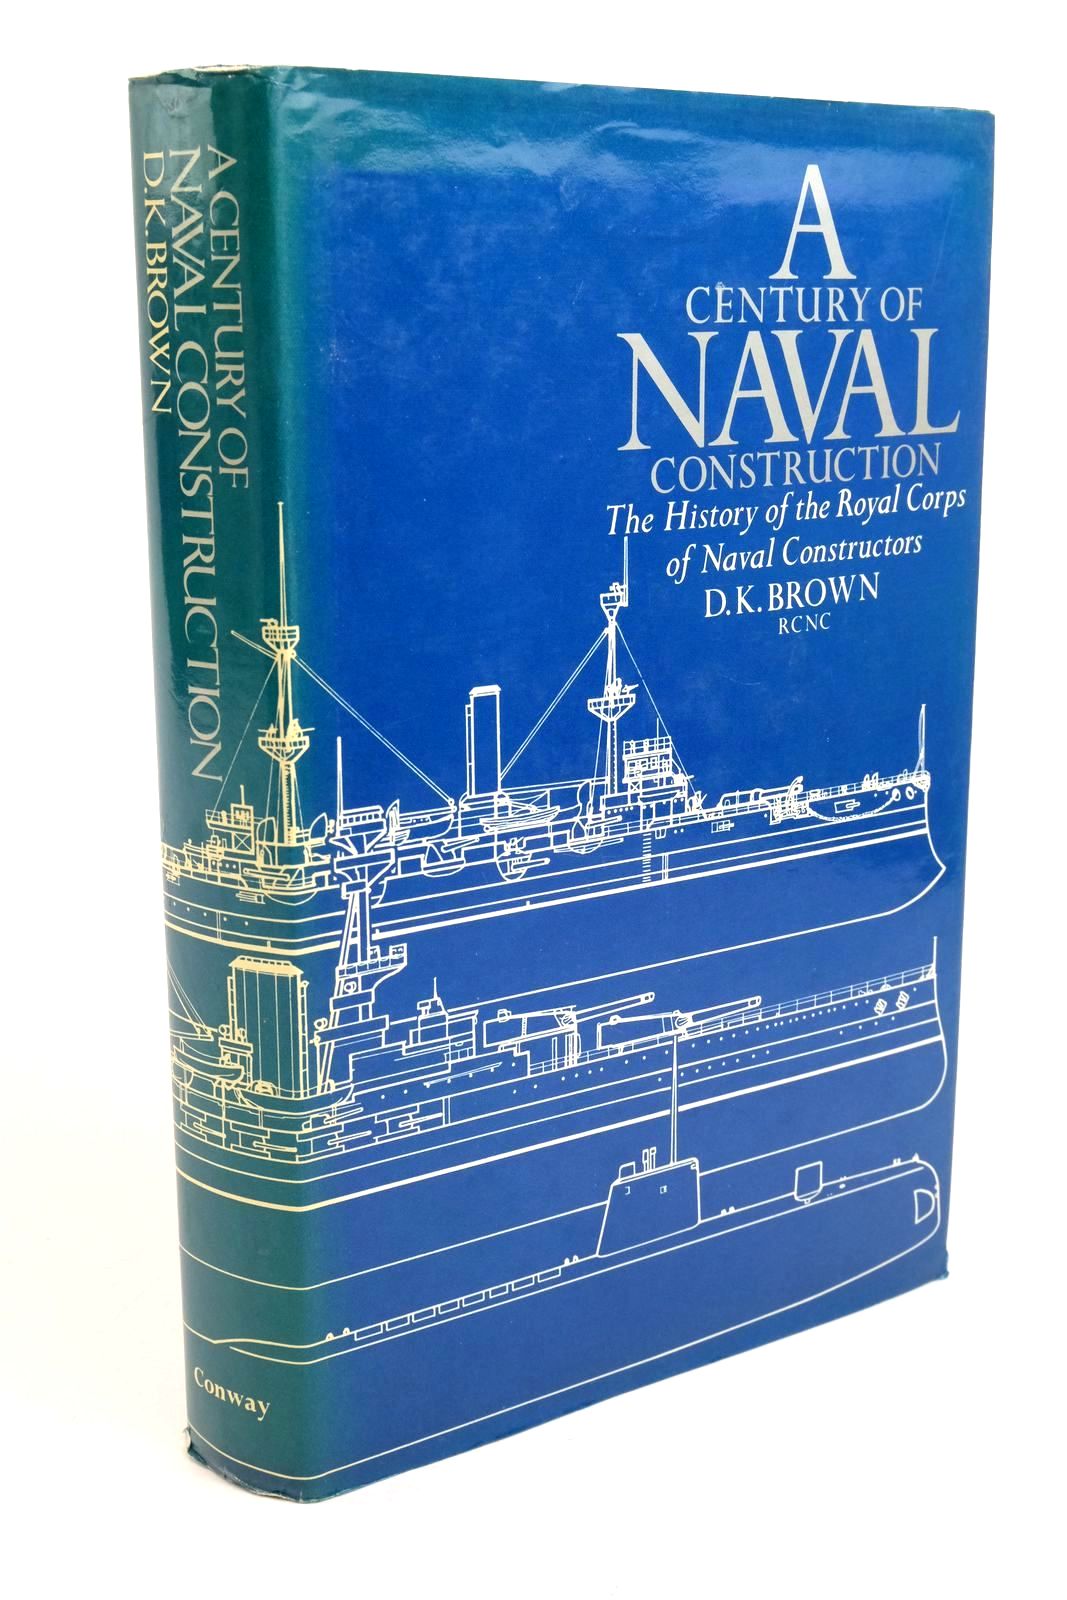 Photo of A CENTURY OF NAVAL CONSTRUCTION written by Brown, David K. published by Conway Maritime Press (STOCK CODE: 1322308)  for sale by Stella & Rose's Books